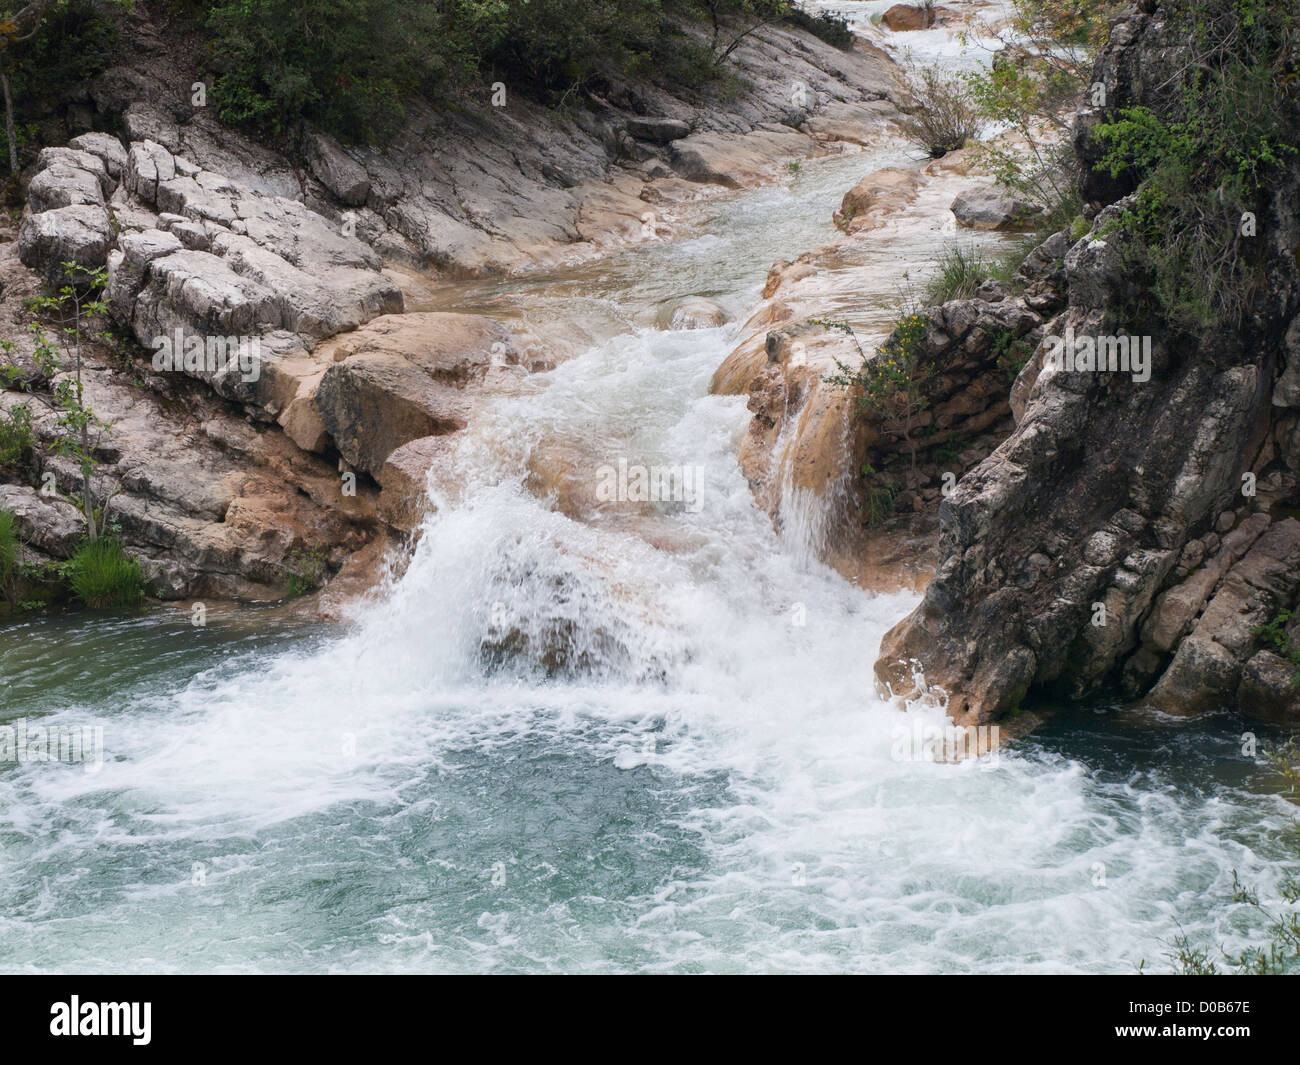 Hiking in Sierrra de Cazorla nature reserve in Andalusia Spain, view of waterfall over cliffs in the Rio Borosa river Stock Photo